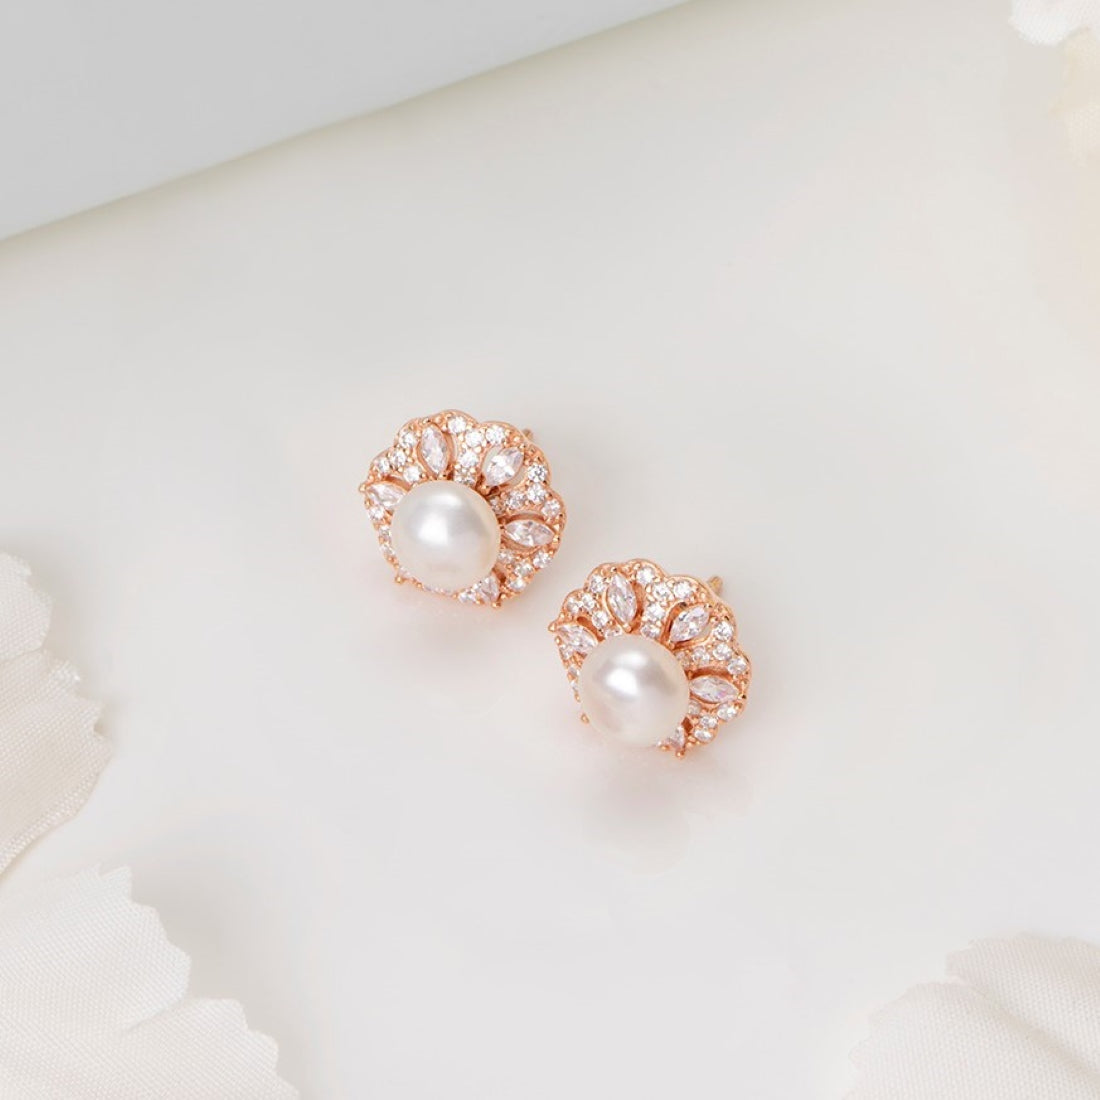 Petals and Pearls Rose Gold-Plated 925 Sterling Silver Floral Earrings